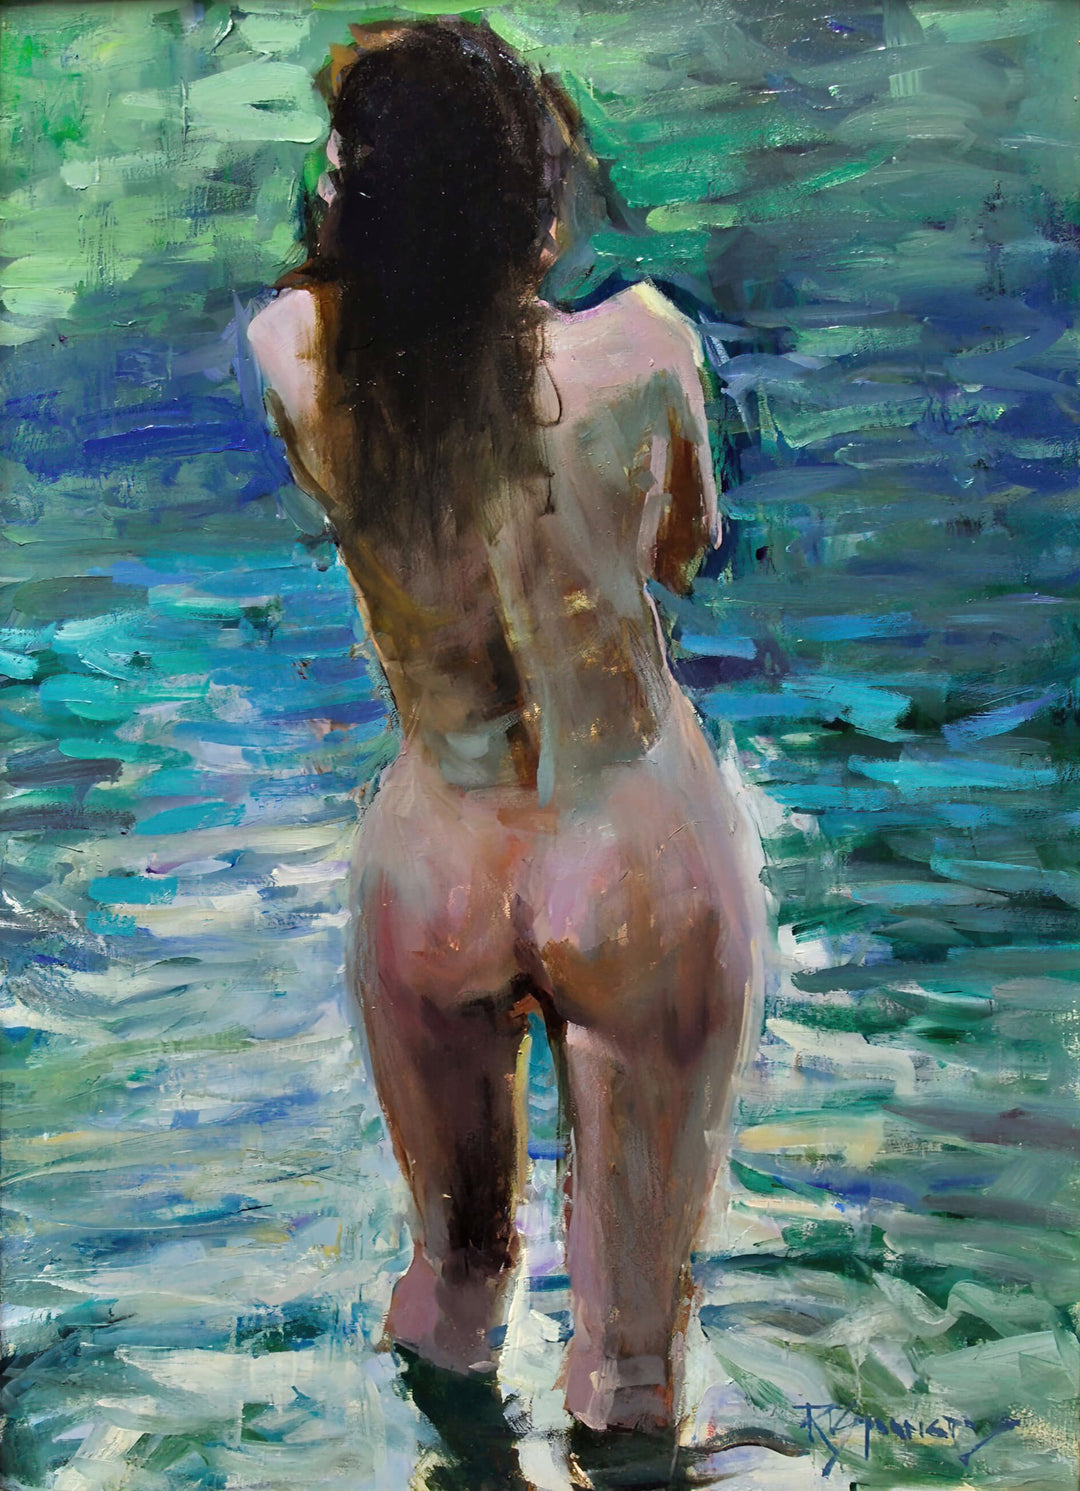 A painting of a nude woman standing in the water, created by Robert Spooner - "Bathing in the Shallows, 2009" by Robert Spooner.